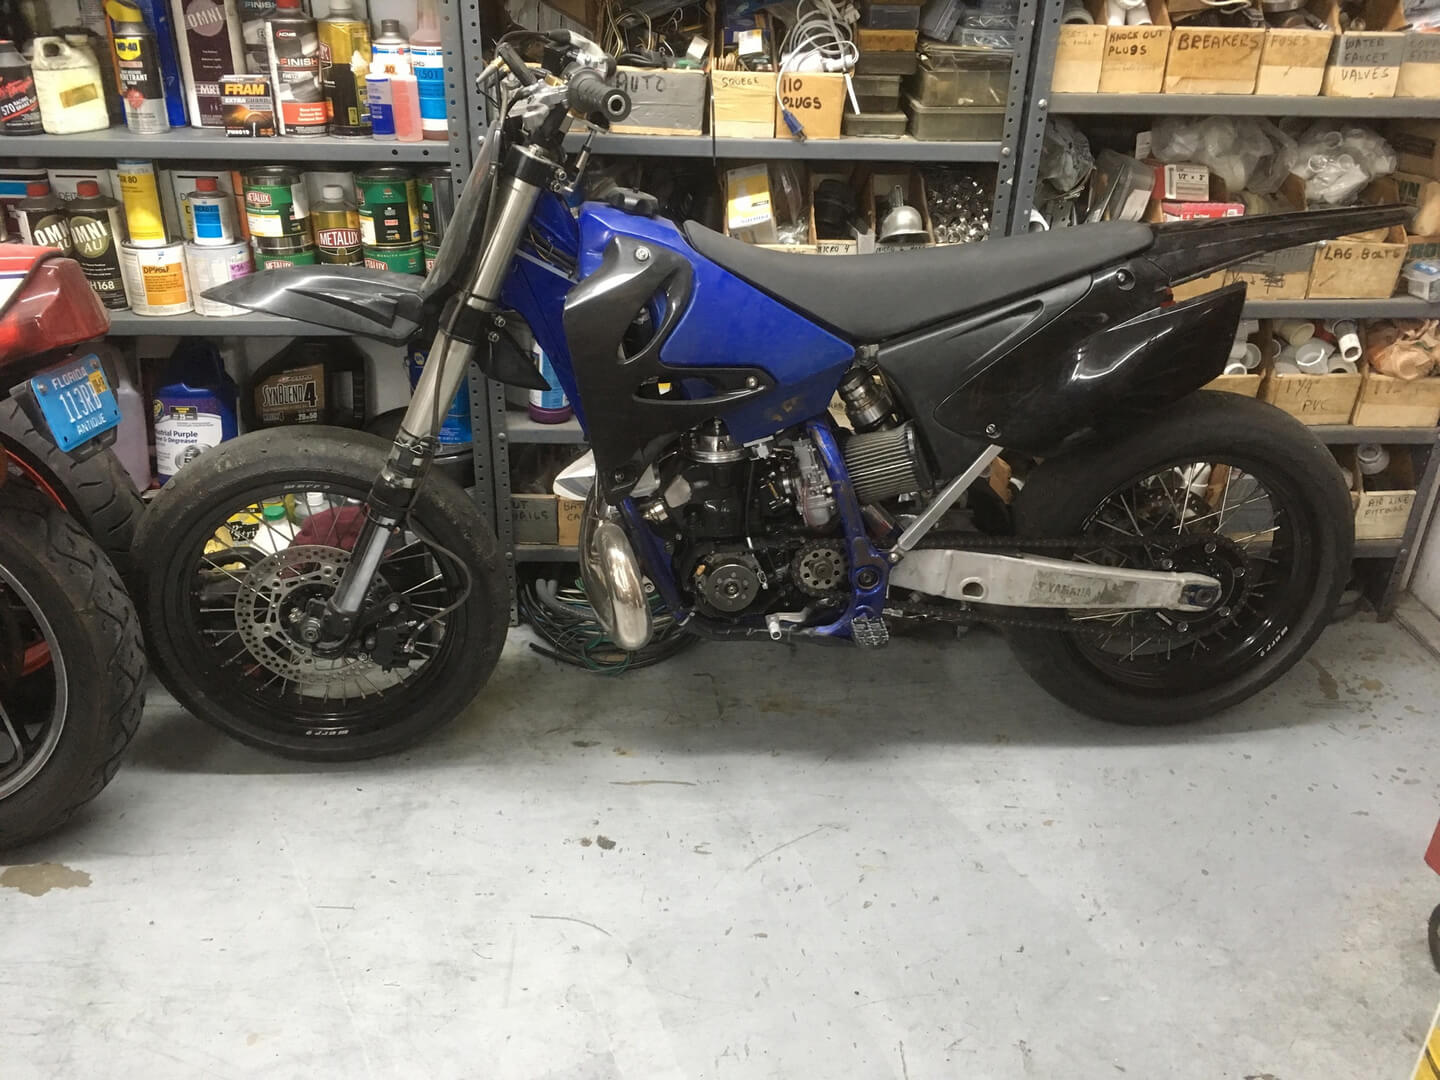 A blue motorcycle parked in a garage next to shelves.